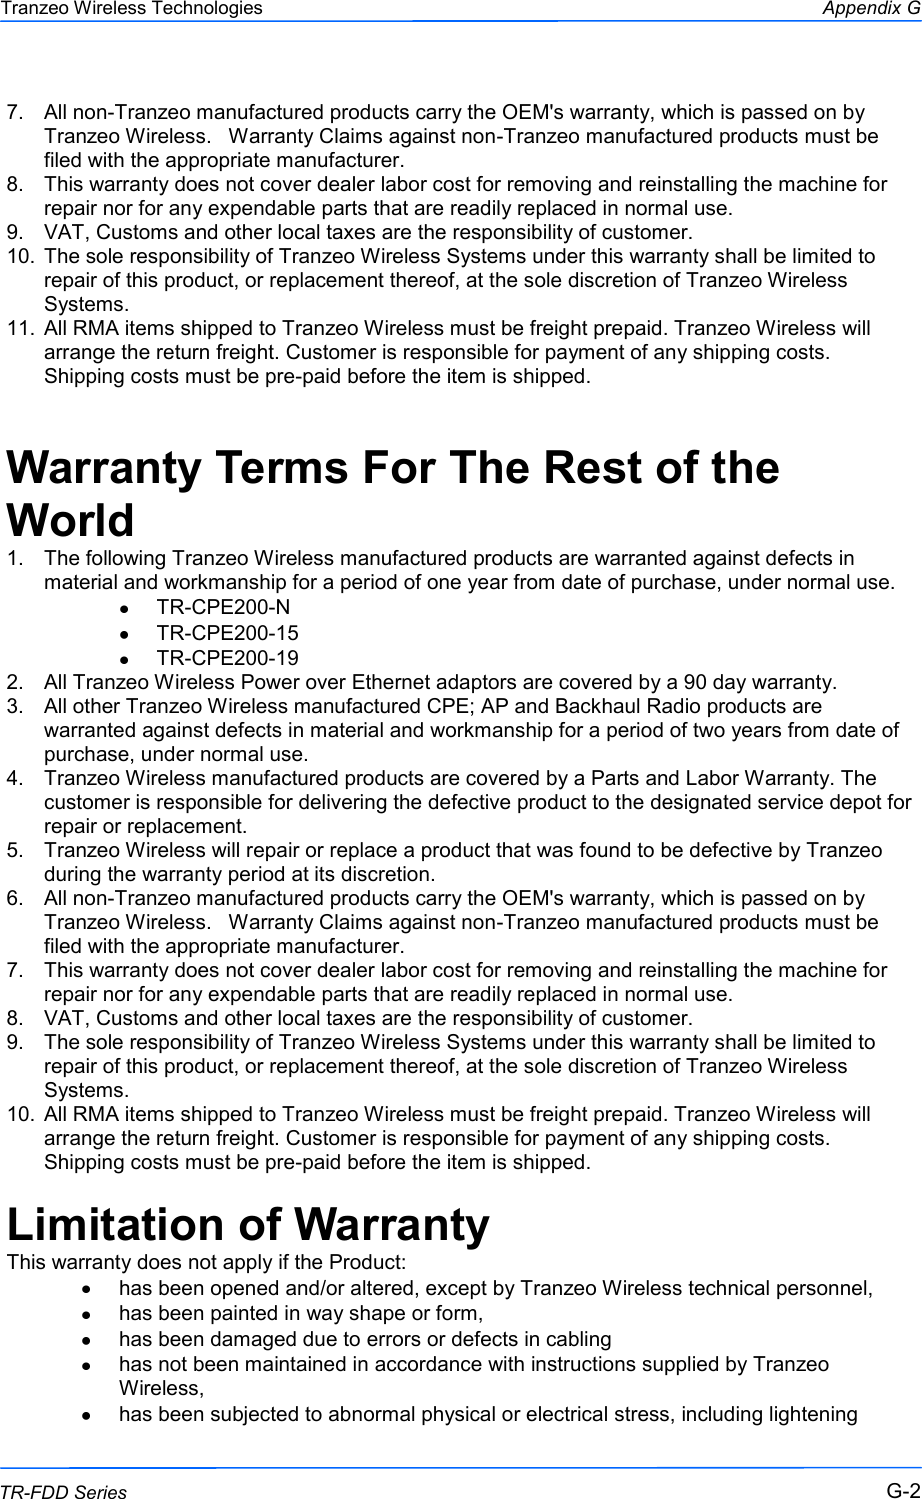  222 This document is intended for Public Distribution                         19473 Fraser Way, Pitt Meadows, B.C. Canada V3Y  2V4 Appendix G G-2 TR-FDD Series Tranzeo Wireless Technologies 7.  All non-Tranzeo manufactured products carry the OEM&apos;s warranty, which is passed on by Tranzeo Wireless.   Warranty Claims against non-Tranzeo manufactured products must be filed with the appropriate manufacturer. 8.  This warranty does not cover dealer labor cost for removing and reinstalling the machine for repair nor for any expendable parts that are readily replaced in normal use. 9.  VAT, Customs and other local taxes are the responsibility of customer. 10.  The sole responsibility of Tranzeo Wireless Systems under this warranty shall be limited to repair of this product, or replacement thereof, at the sole discretion of Tranzeo Wireless Systems. 11.  All RMA items shipped to Tranzeo Wireless must be freight prepaid. Tranzeo Wireless will arrange the return freight. Customer is responsible for payment of any shipping costs. Shipping costs must be pre-paid before the item is shipped.  Warranty Terms For The Rest of the World 1.  The following Tranzeo Wireless manufactured products are warranted against defects in material and workmanship for a period of one year from date of purchase, under normal use. TR-CPE200-N TR-CPE200-15 TR-CPE200-19 2.  All Tranzeo Wireless Power over Ethernet adaptors are covered by a 90 day warranty. 3.  All other Tranzeo Wireless manufactured CPE; AP and Backhaul Radio products are warranted against defects in material and workmanship for a period of two years from date of purchase, under normal use. 4.  Tranzeo Wireless manufactured products are covered by a Parts and Labor Warranty. The customer is responsible for delivering the defective product to the designated service depot for repair or replacement. 5.  Tranzeo Wireless will repair or replace a product that was found to be defective by Tranzeo during the warranty period at its discretion. 6.  All non-Tranzeo manufactured products carry the OEM&apos;s warranty, which is passed on by Tranzeo Wireless.   Warranty Claims against non-Tranzeo manufactured products must be filed with the appropriate manufacturer. 7.  This warranty does not cover dealer labor cost for removing and reinstalling the machine for repair nor for any expendable parts that are readily replaced in normal use. 8.  VAT, Customs and other local taxes are the responsibility of customer. 9.  The sole responsibility of Tranzeo Wireless Systems under this warranty shall be limited to repair of this product, or replacement thereof, at the sole discretion of Tranzeo Wireless Systems. 10.  All RMA items shipped to Tranzeo Wireless must be freight prepaid. Tranzeo Wireless will arrange the return freight. Customer is responsible for payment of any shipping costs. Shipping costs must be pre-paid before the item is shipped.  Limitation of Warranty This warranty does not apply if the Product: has been opened and/or altered, except by Tranzeo Wireless technical personnel, has been painted in way shape or form, has been damaged due to errors or defects in cabling has not been maintained in accordance with instructions supplied by Tranzeo Wireless, has been subjected to abnormal physical or electrical stress, including lightening 